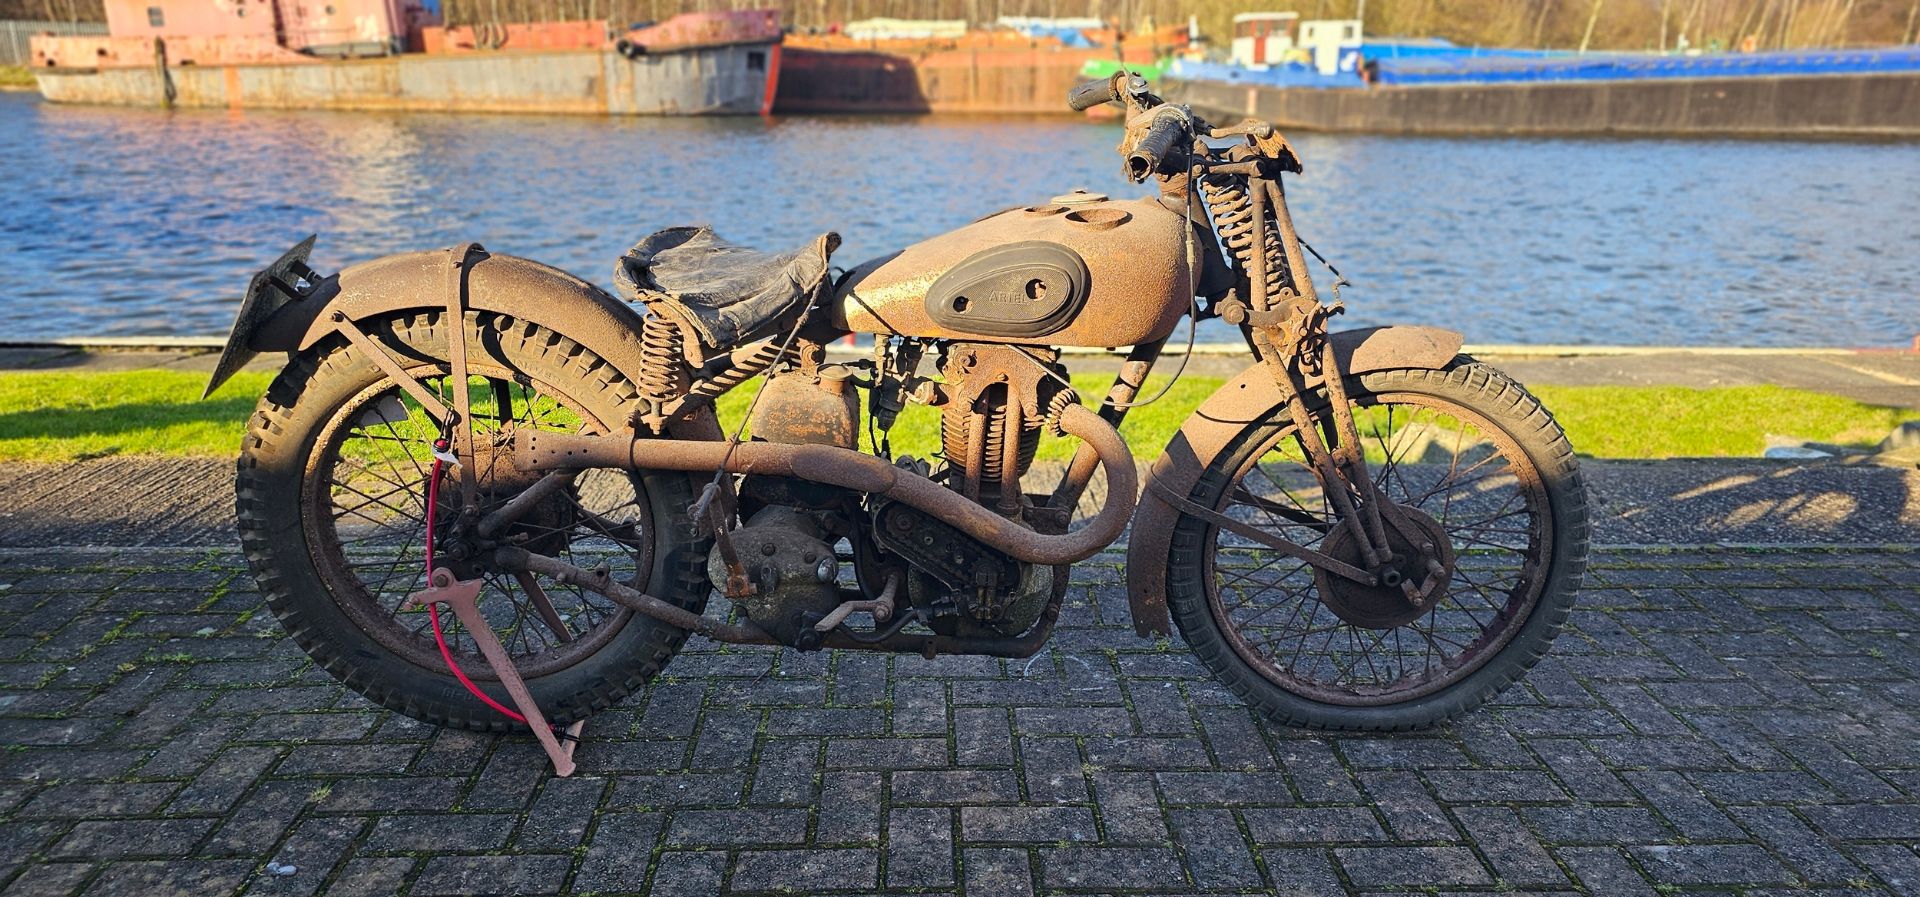 1932 Ariel VH 32, Red Hunter project, 350cc. Registration number TS 9810 (non transferrable).